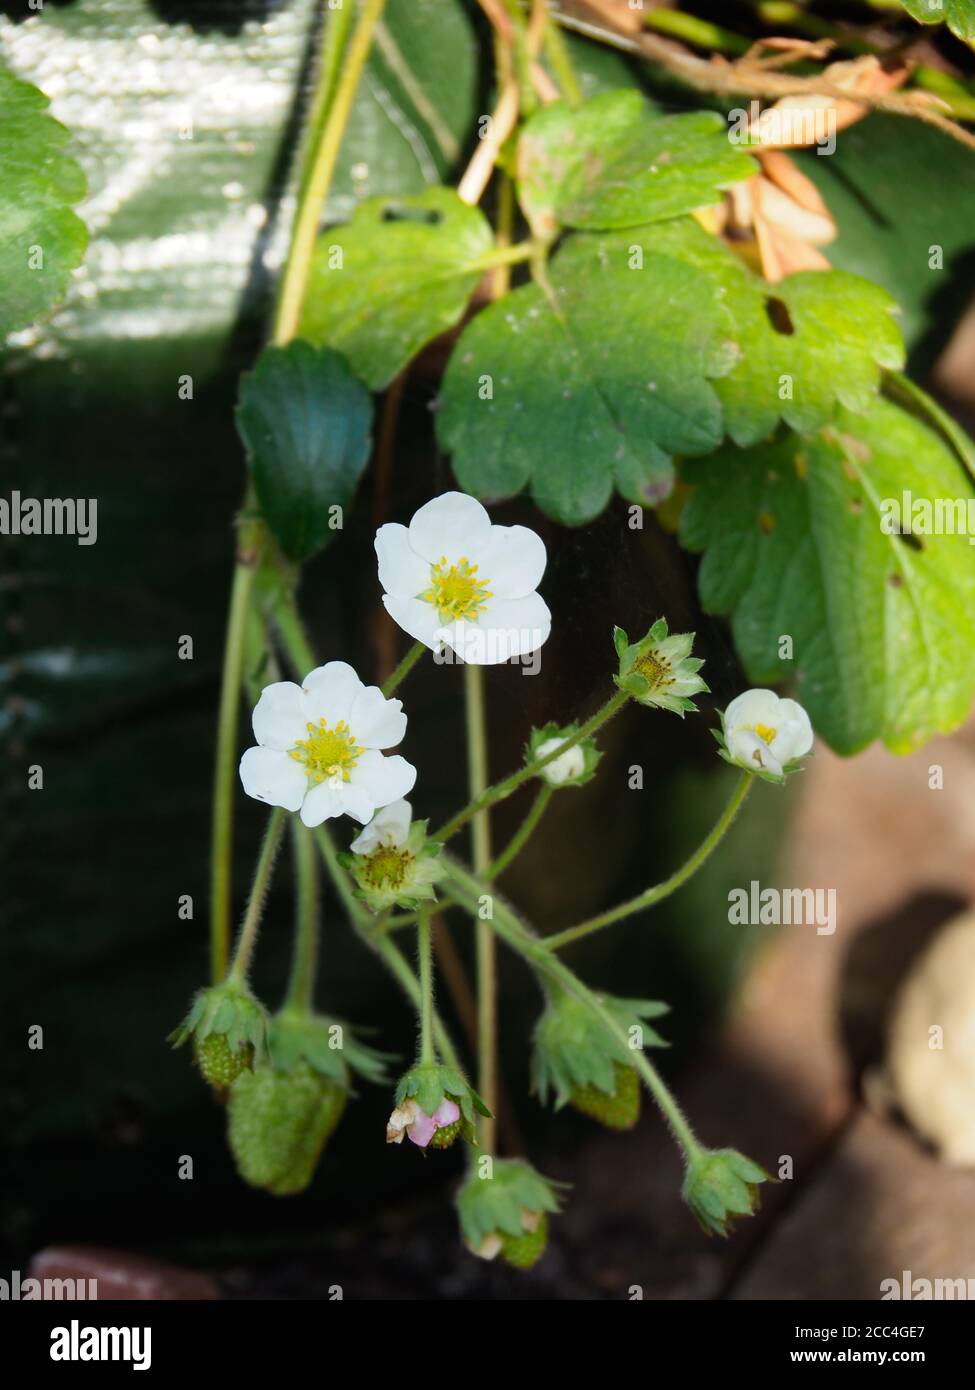 strawberry plant in flower, montana variety, growing in a green plastic growing bag Stock Photo